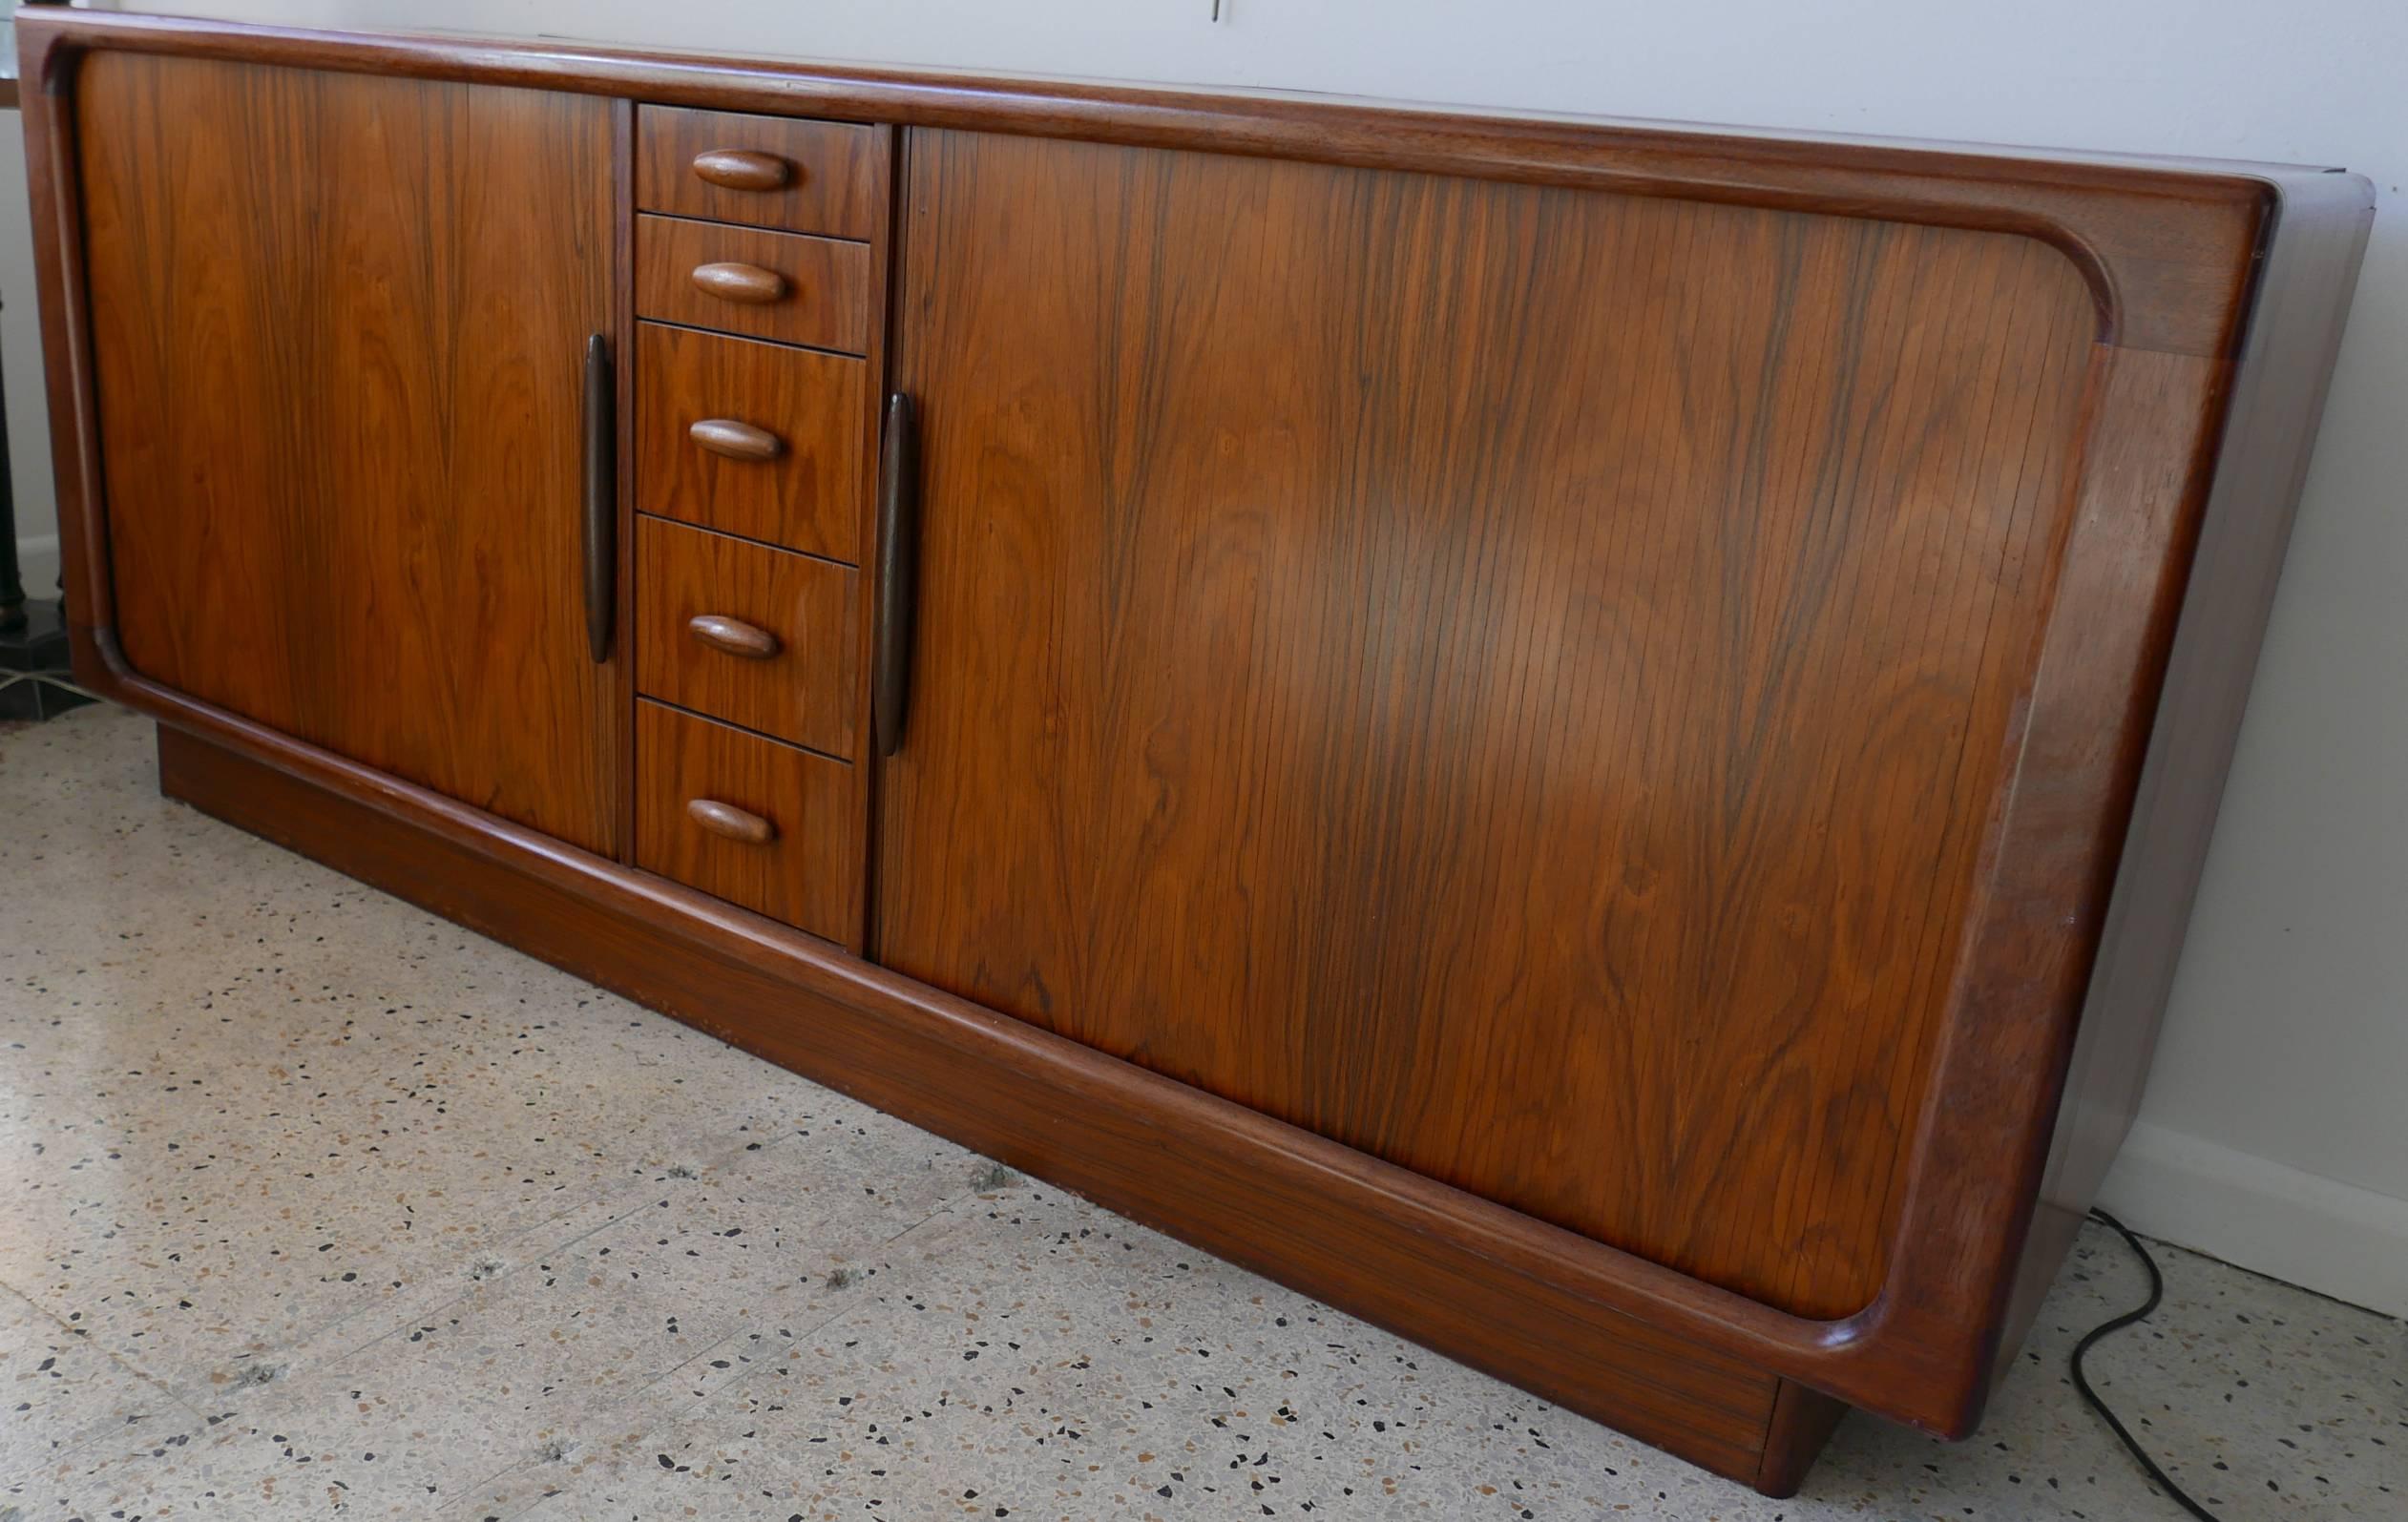 Dyrlund dresser credenza of rosewood from Denmark with tambor doors, circa 1970. Deep storage capacity. See companion dresser in our listings for his/her bedroom set.